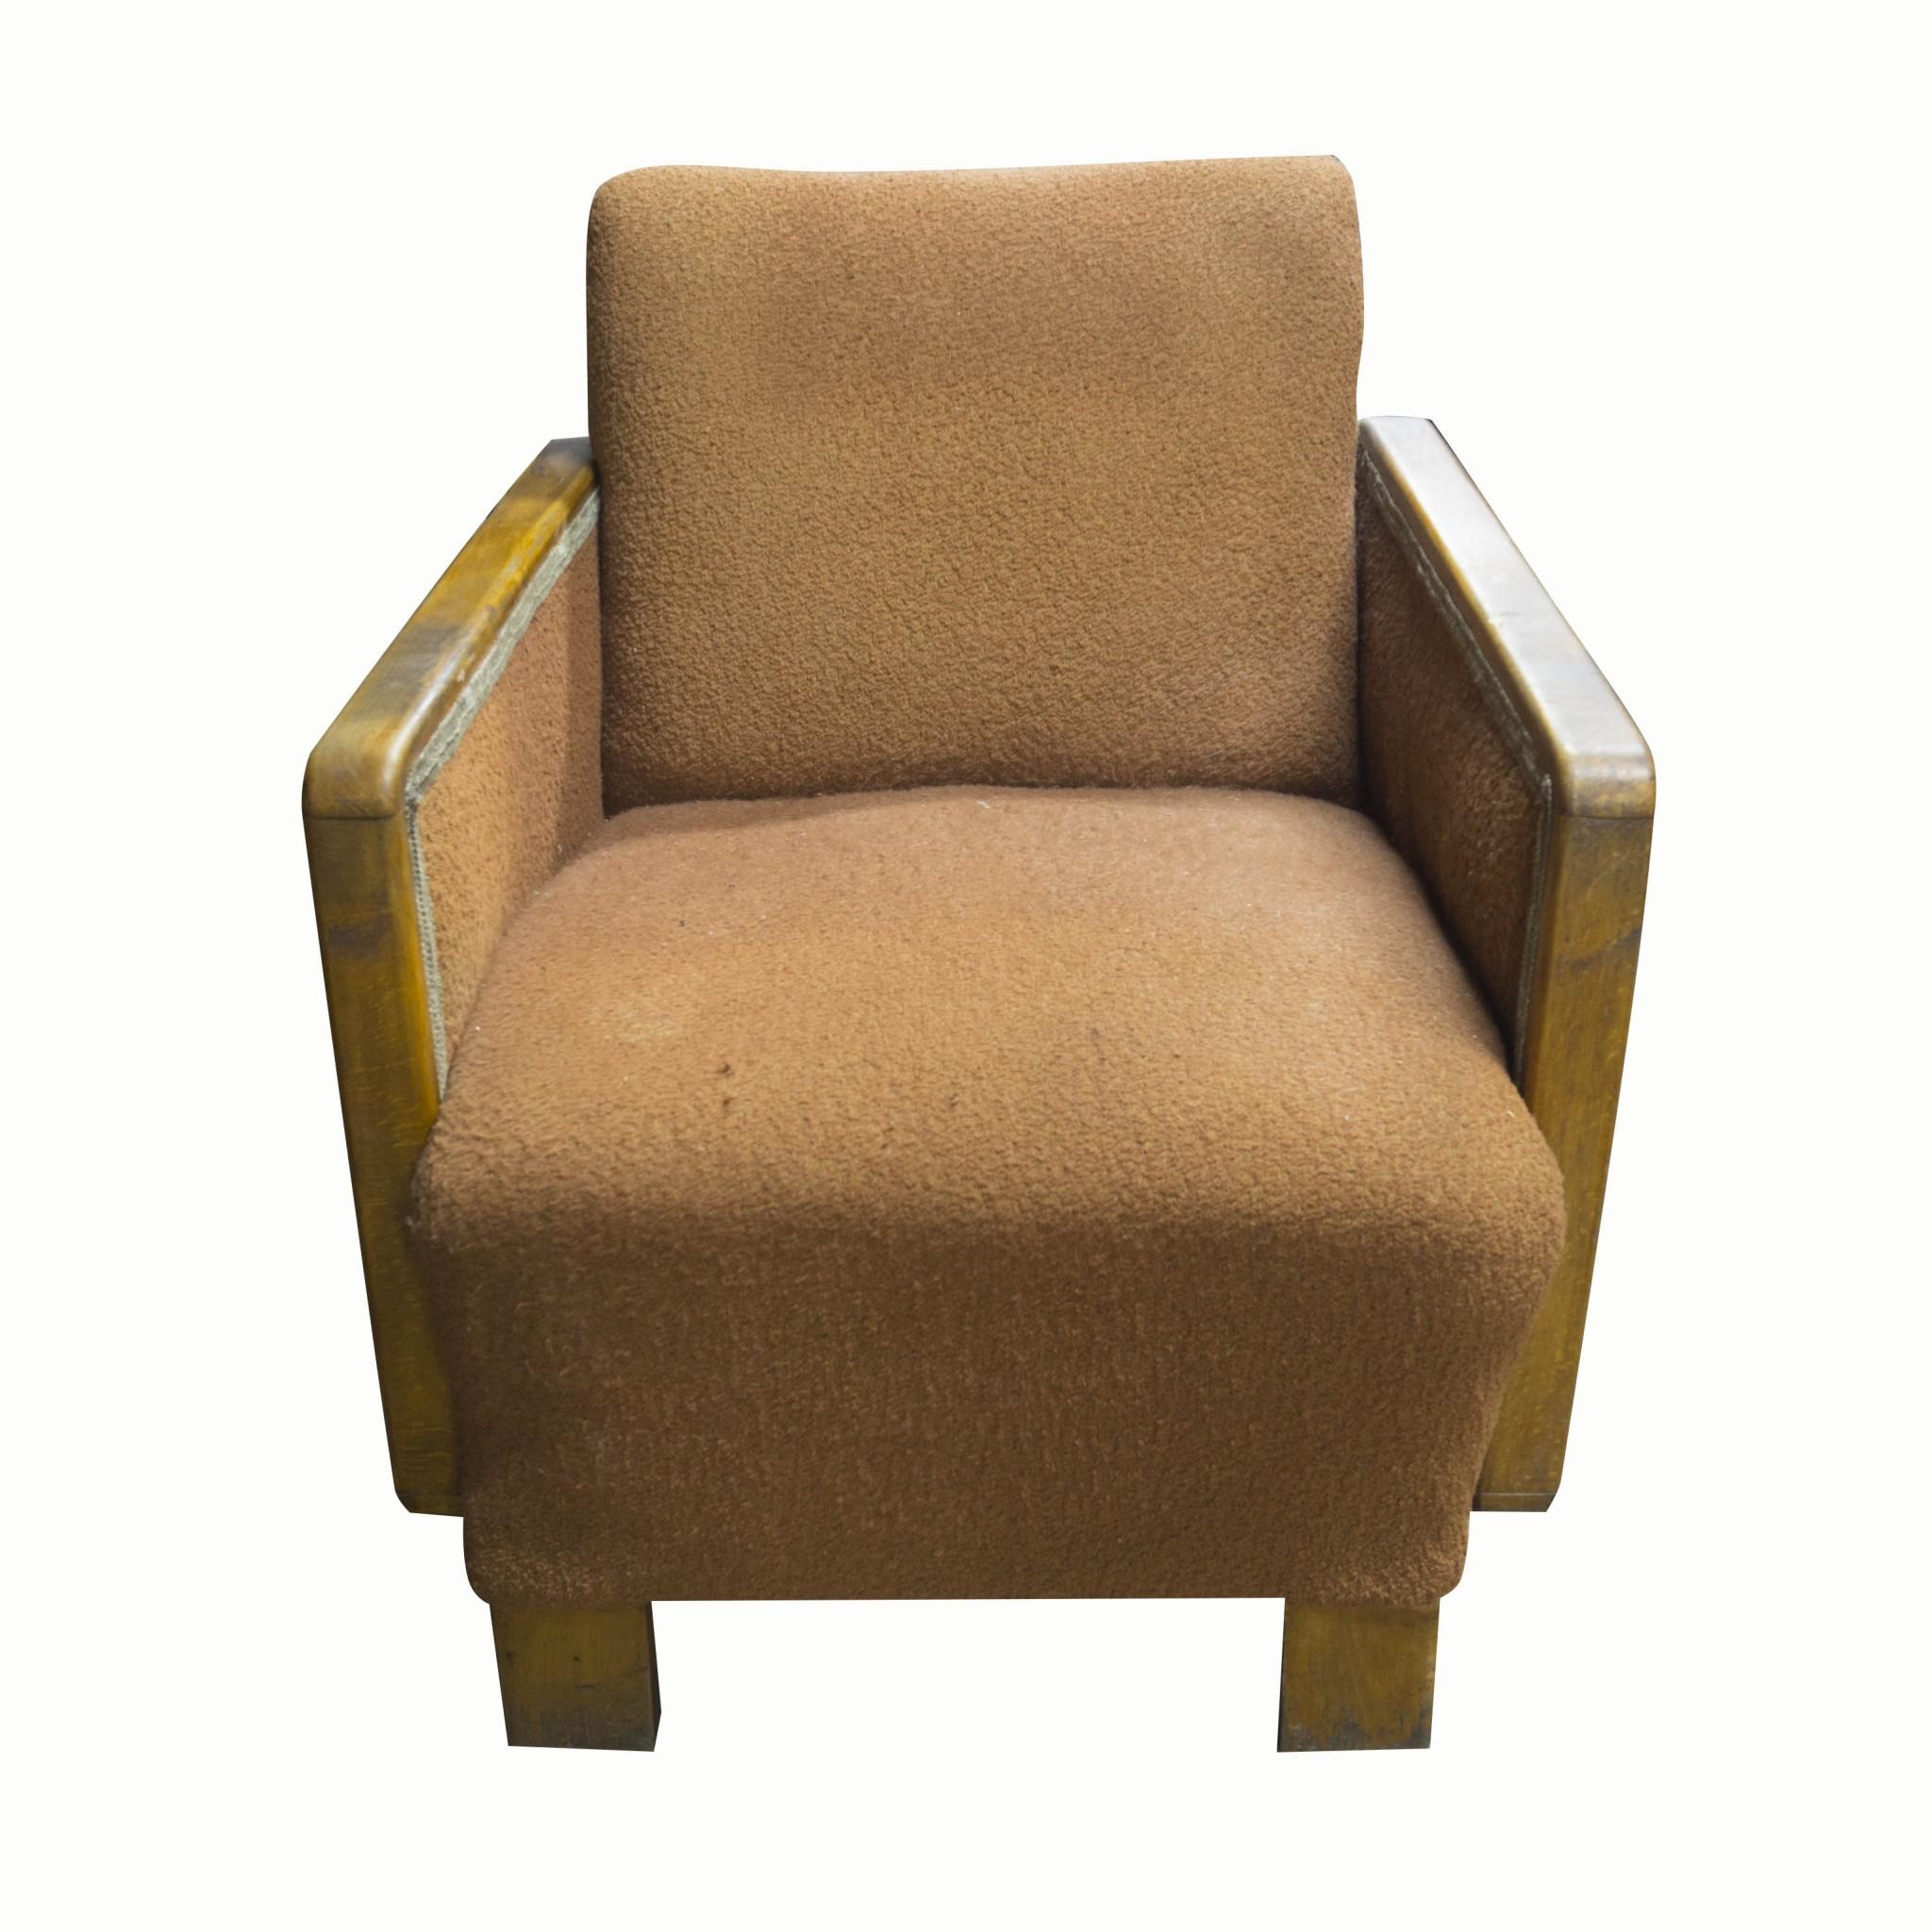 Art Deco style armchair, made in the 1930s in Central Europe. Made in a combination of beech and walnut wood, upholstered in fabric, inside are springs. The chair bears the surface signs of age and use, but structurally is ok.
     